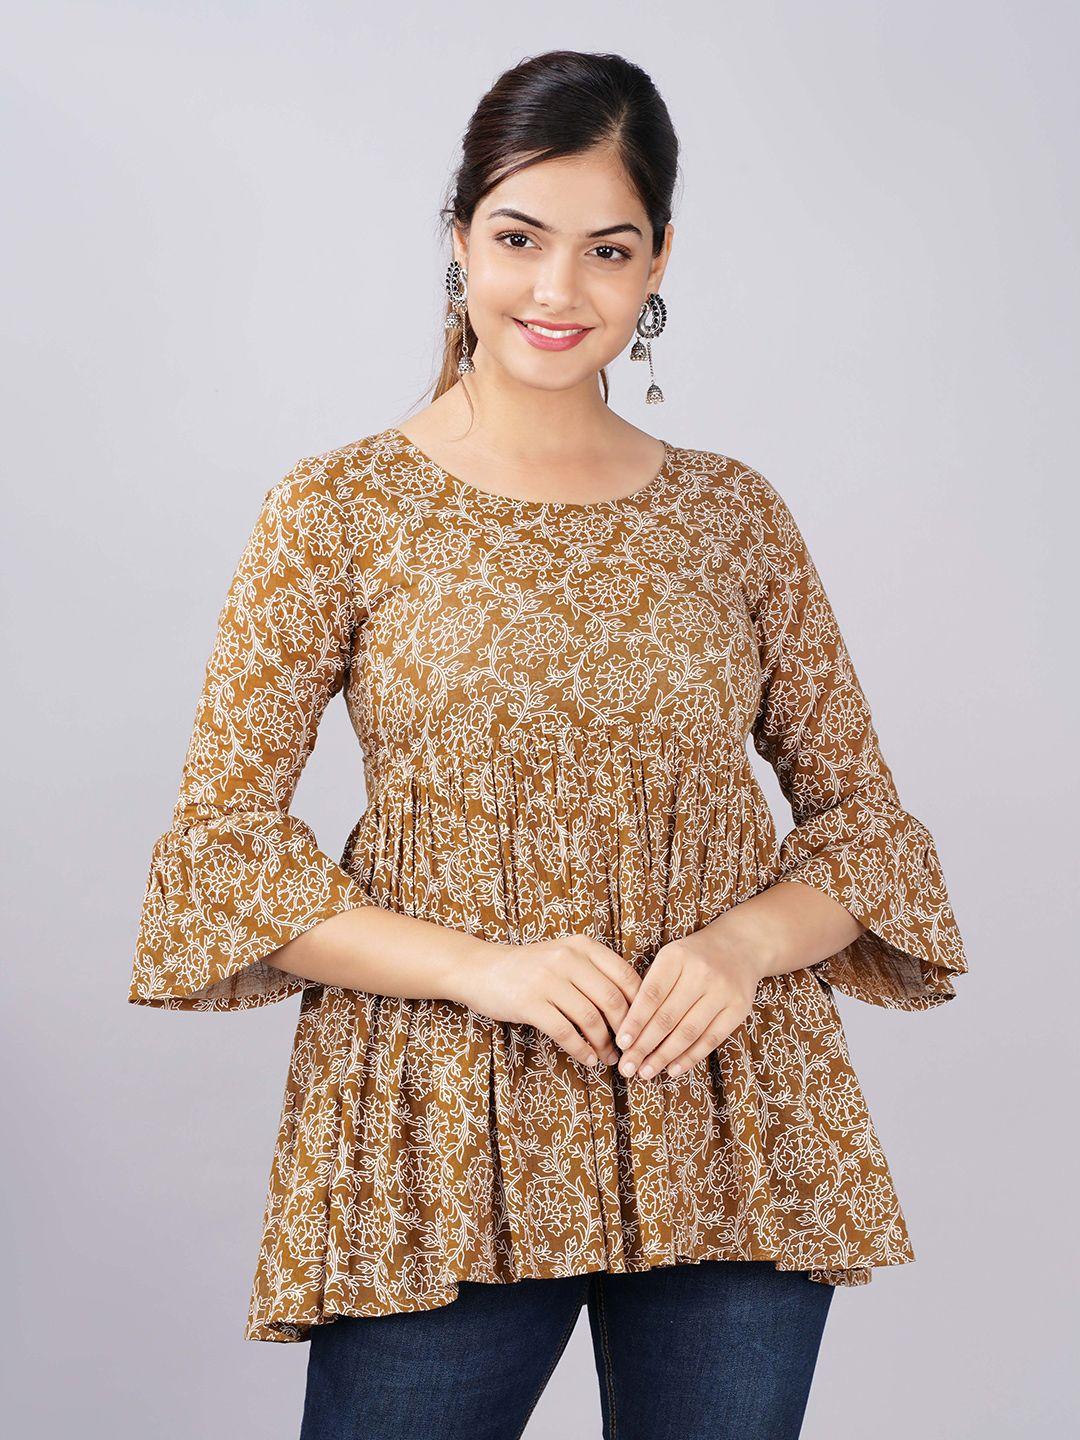 christeena brown & beige floral printed cotton empire top